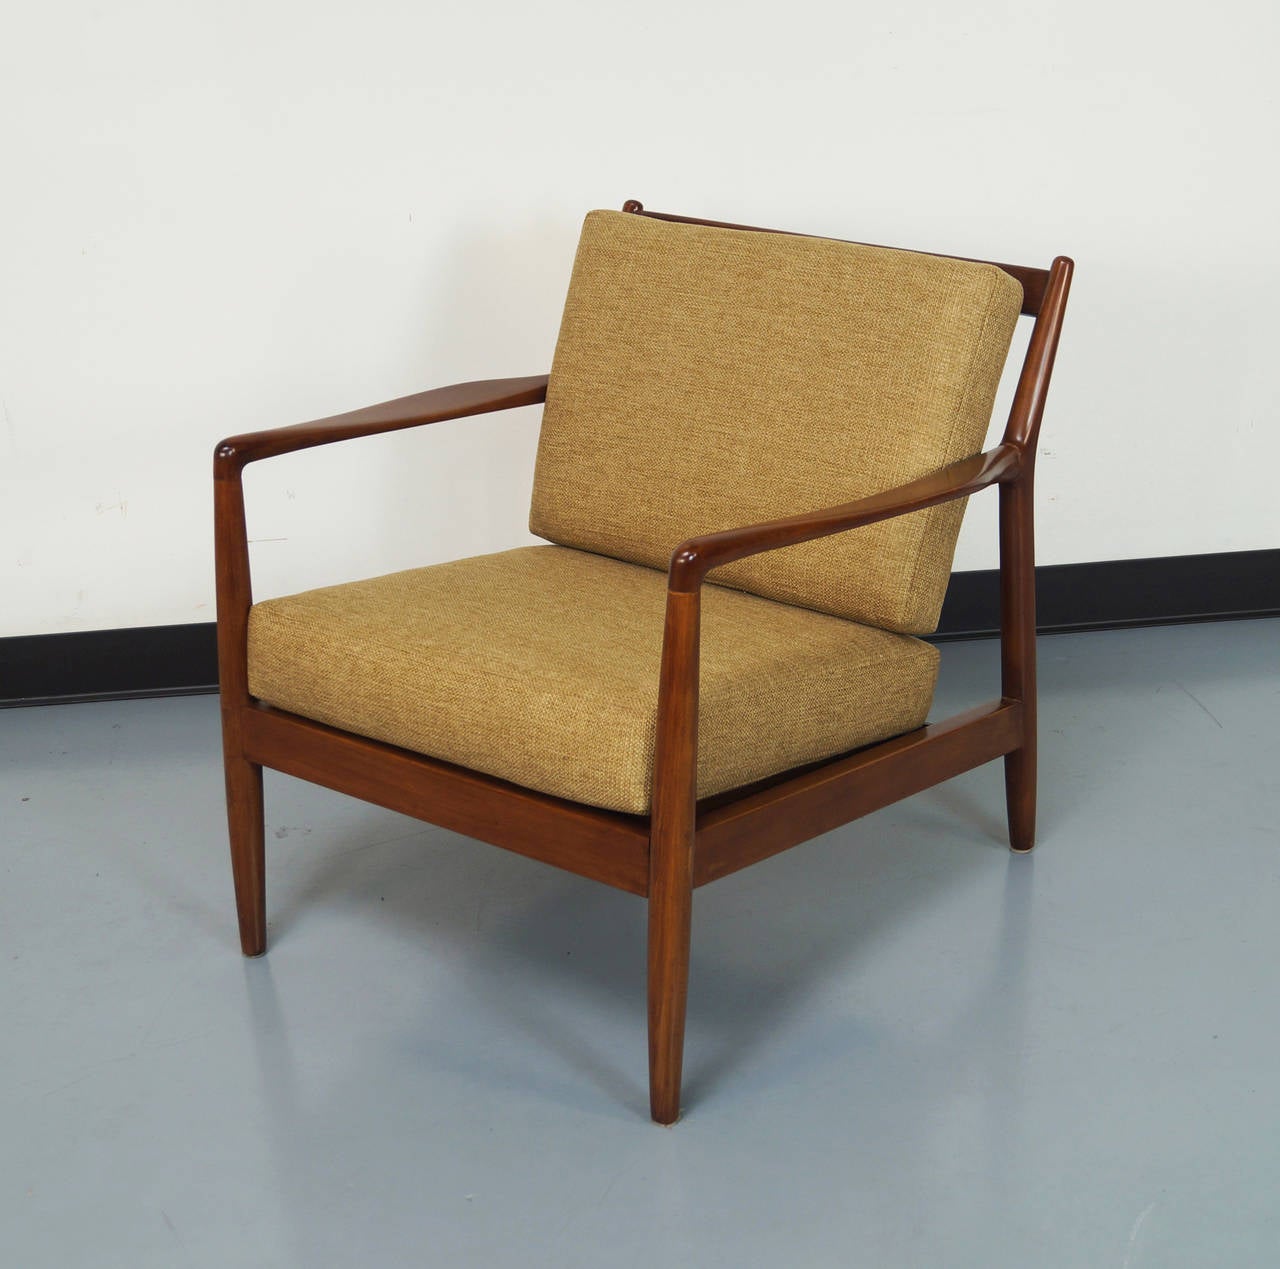 Swedish Mid-Century Lounge Chair by Folke Ohlsson